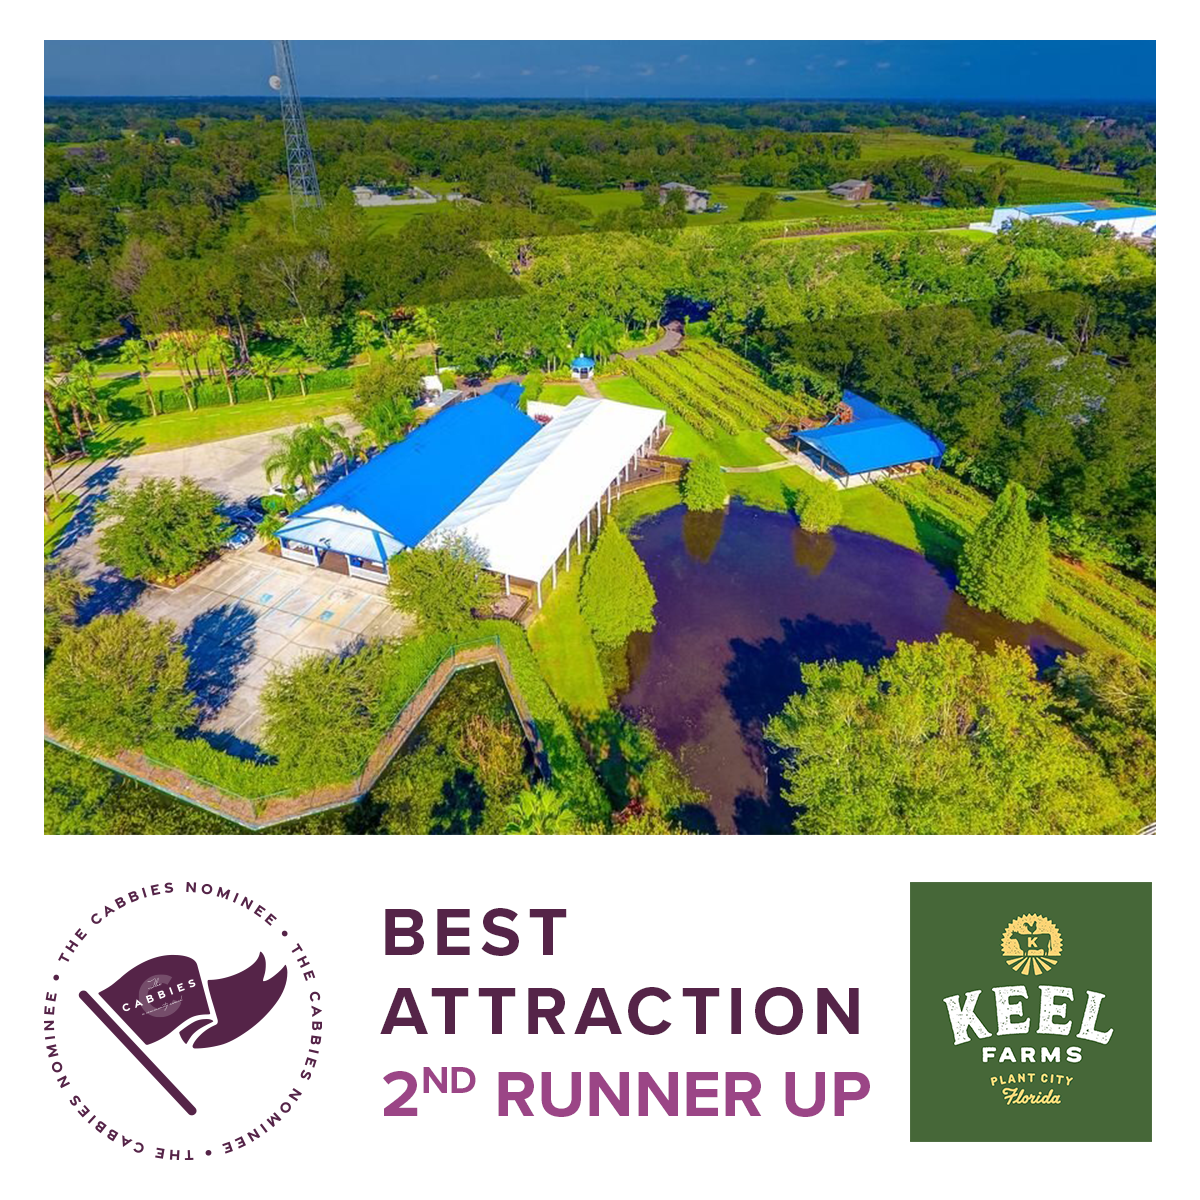 best attraction 2nd runner up - keel farms